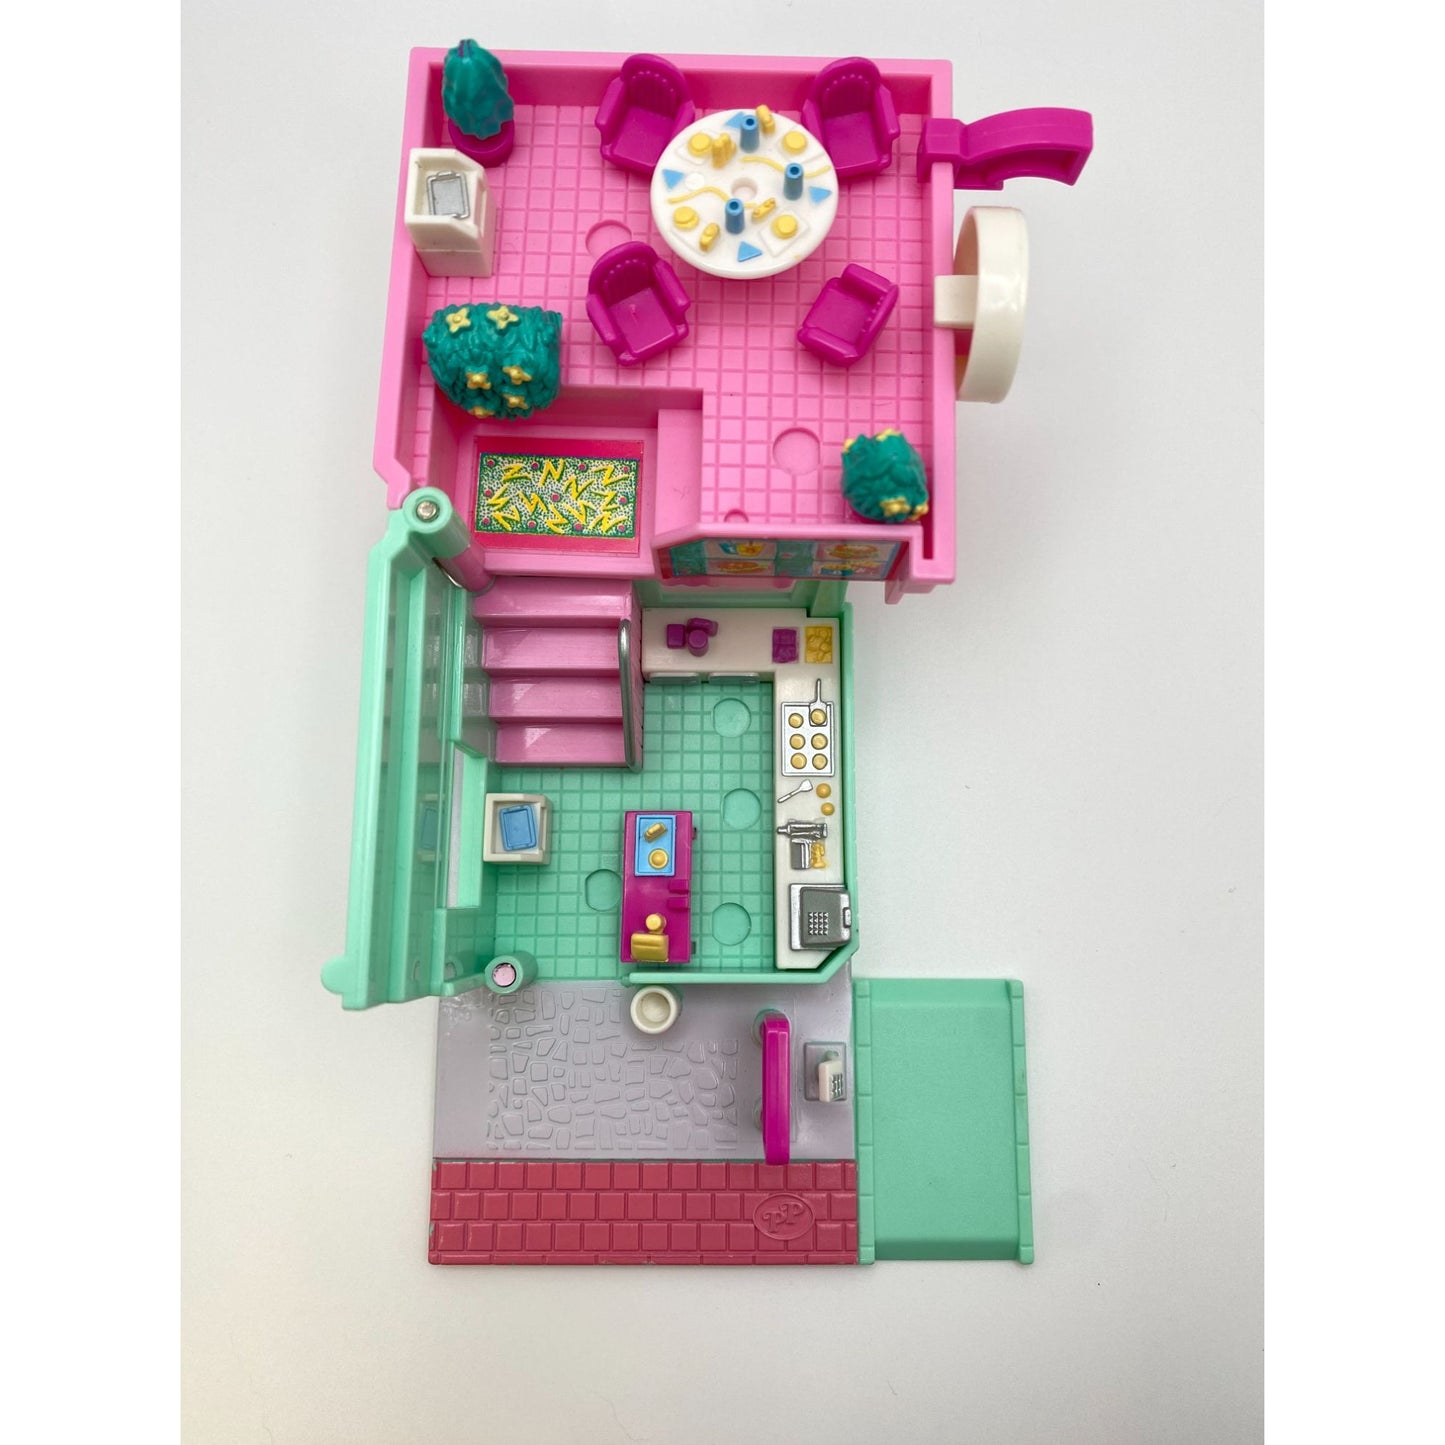 1994 Polly Pocket Drive-In Burger Restaurant Building ONLY